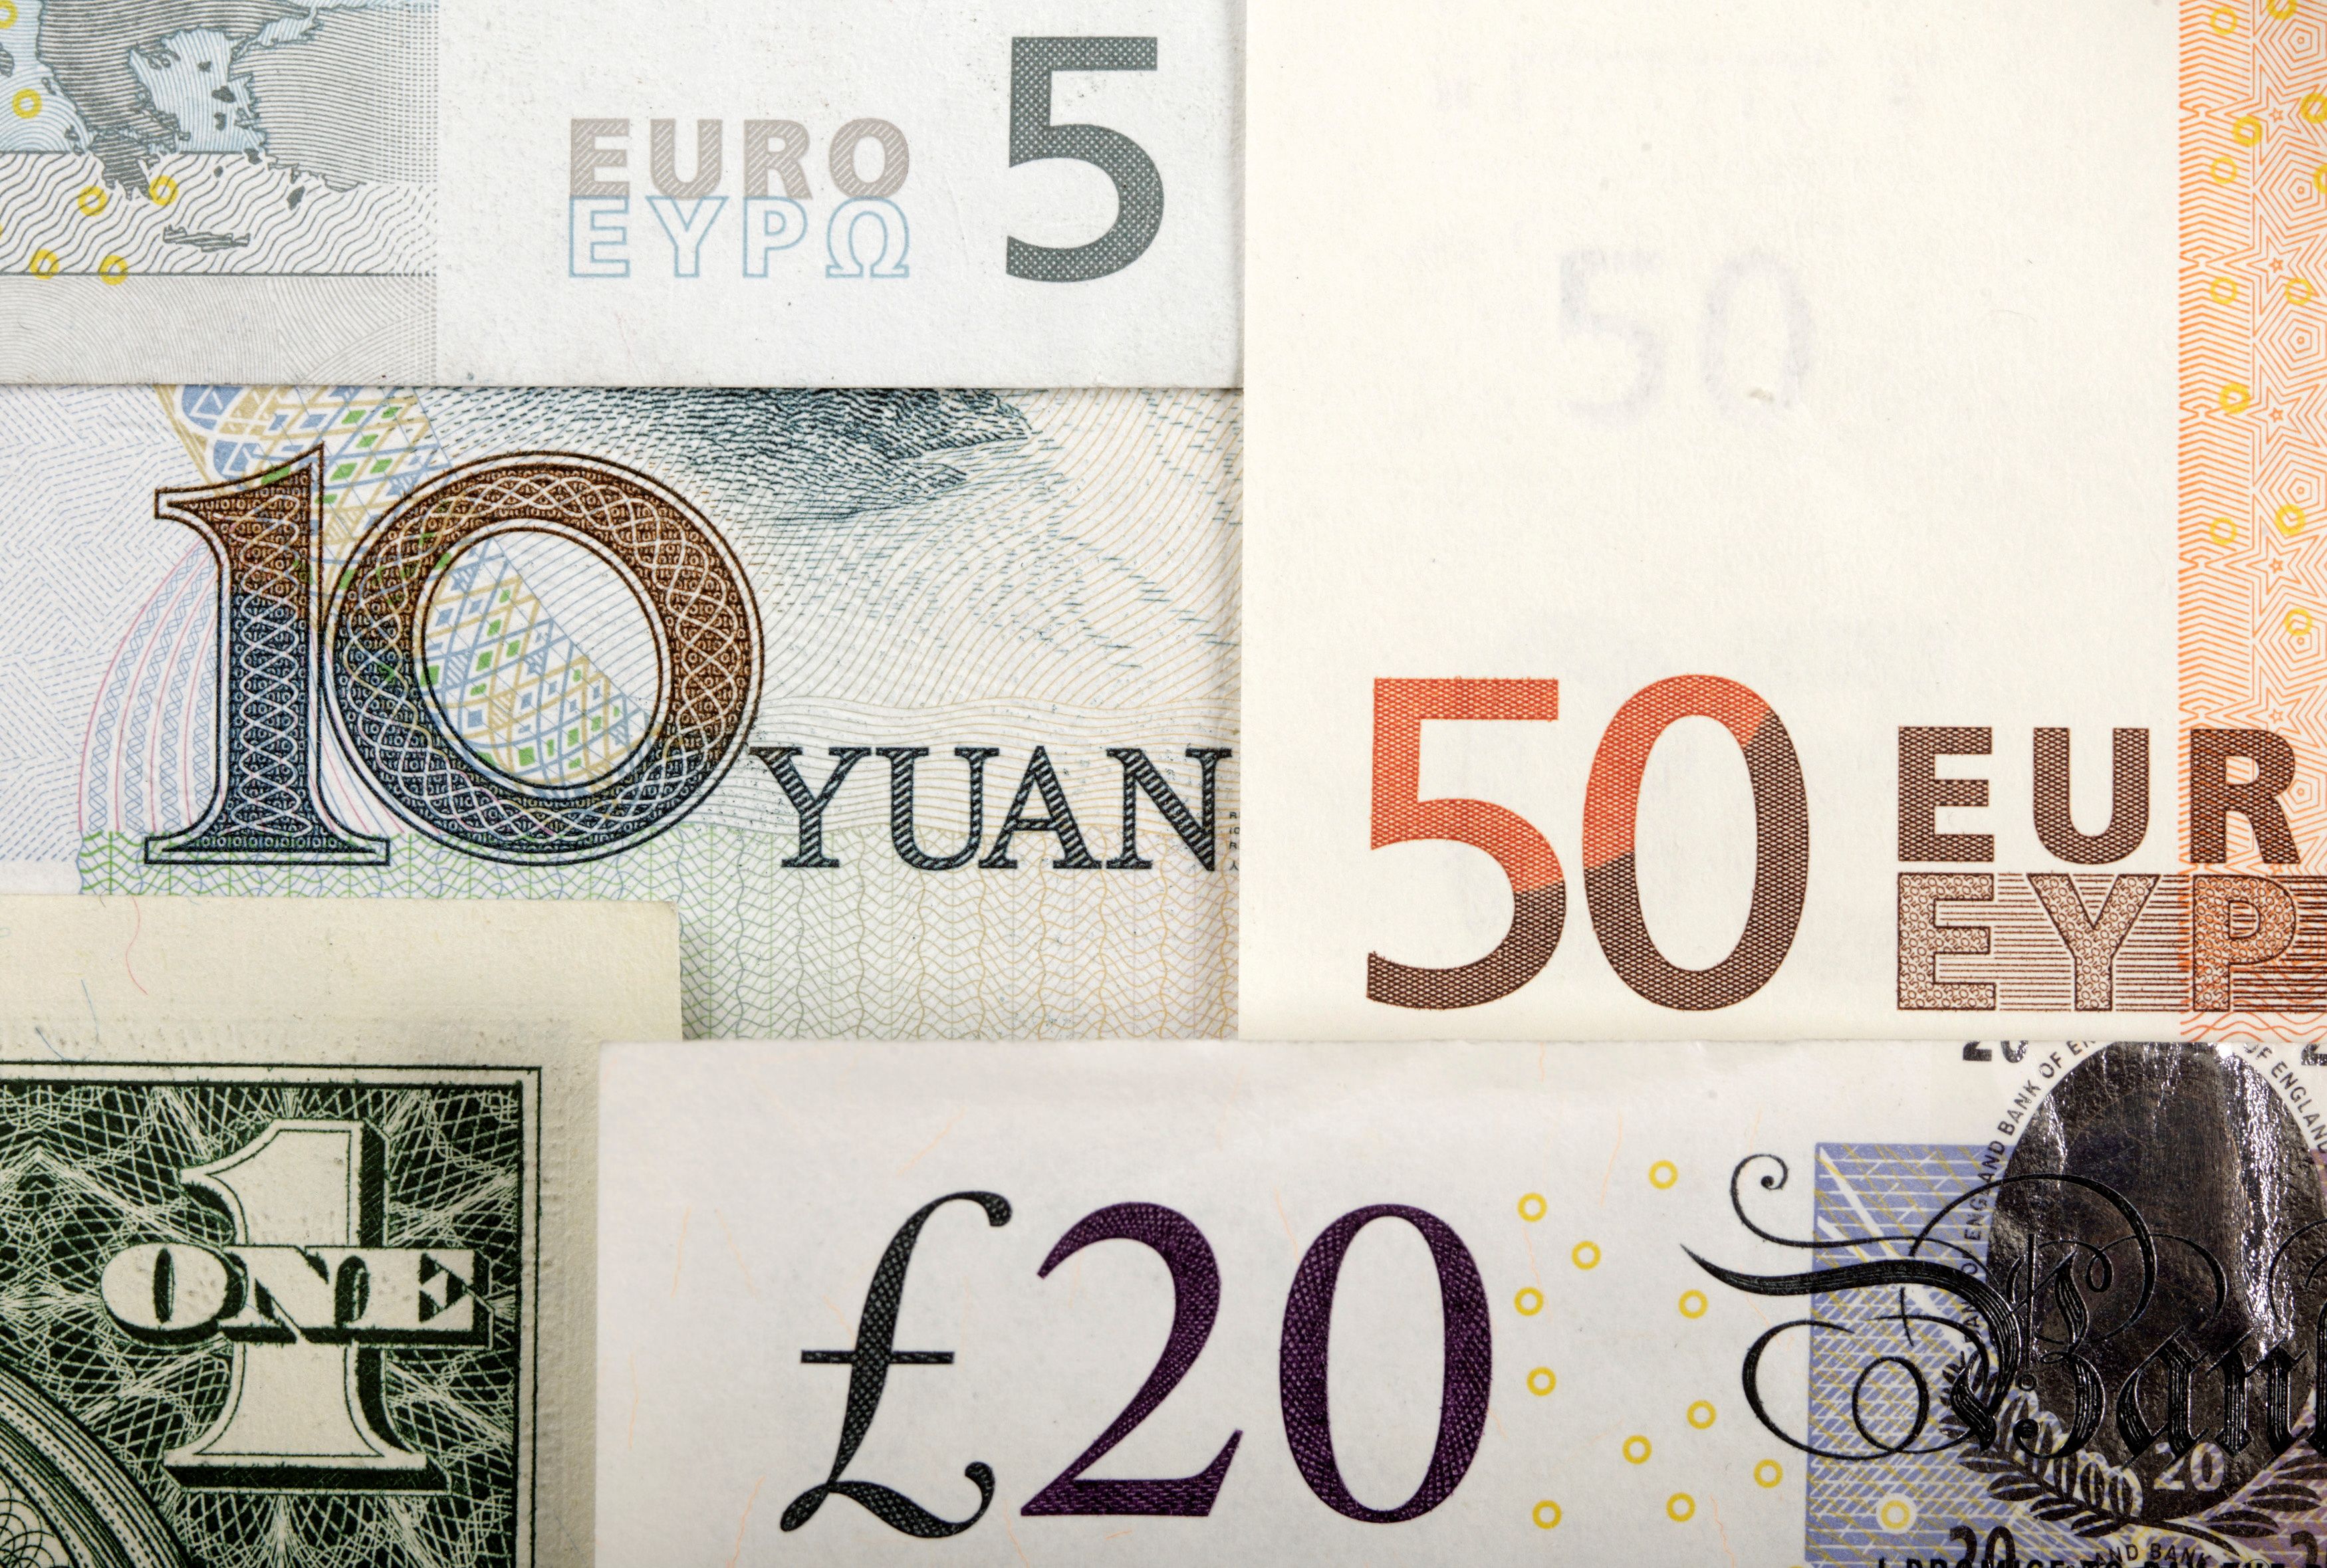 Arrangement of various world currencies including Chinese yuan, U.S. dollar, Euro, British pound